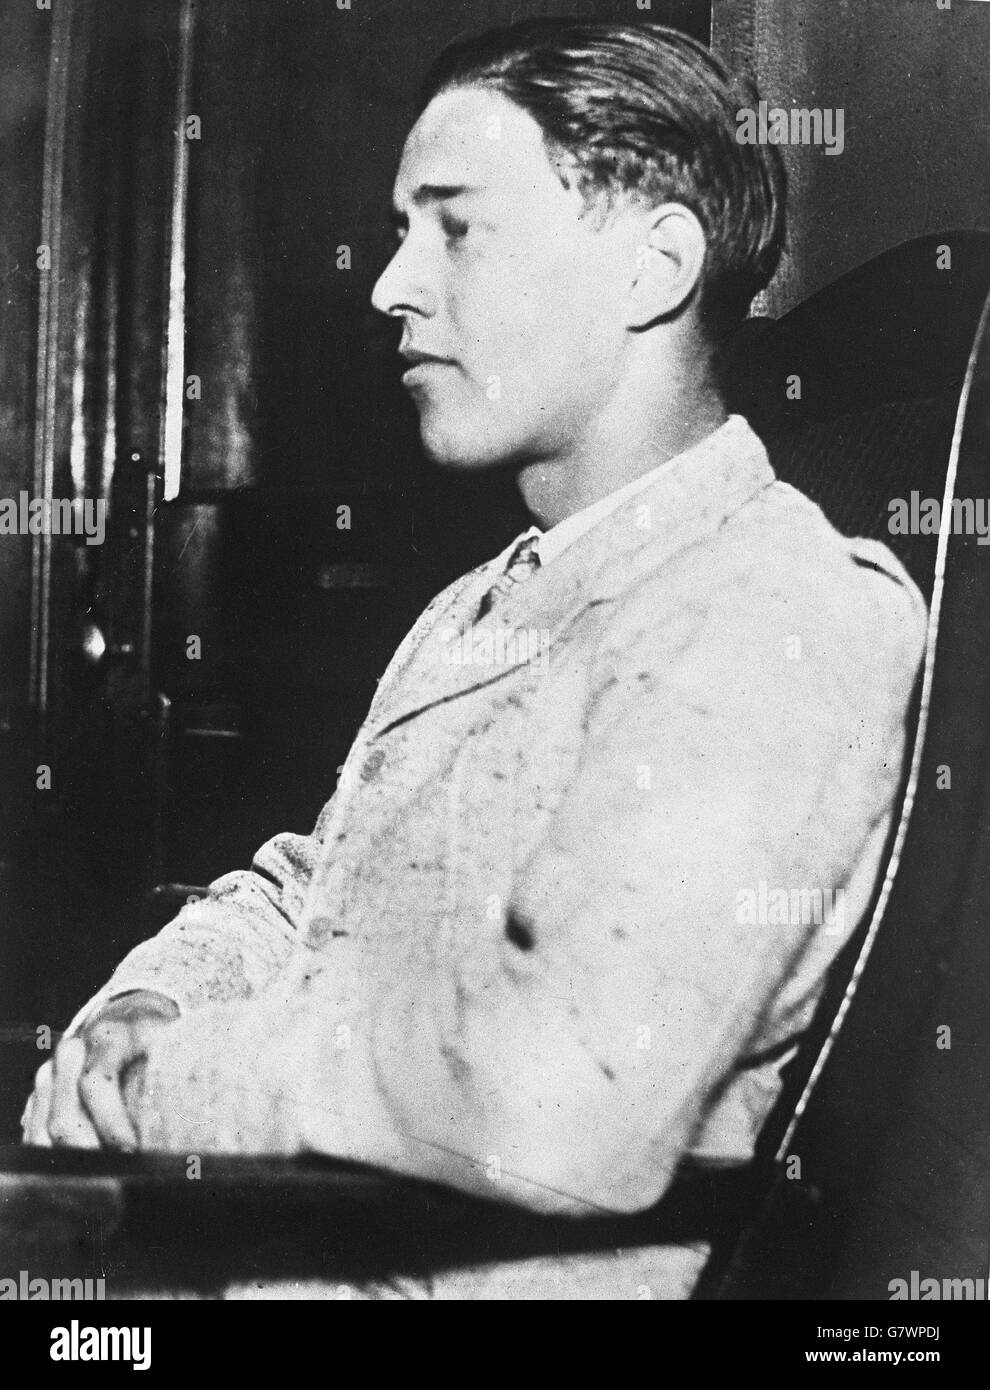 Richard Loeb (pictured) and his friend, Nathan Leopold were charged with the murder of Robert Franks, the schoolboy son of another Chicago Millionaire. They were defended by the brilliant lawyer, Clarence Darrow, who was able to keep them from the electric chair through his sensational oration. Darrow went on to defend John T Scopes in one of the most talked about trials of all time; The Monkey Trial, where Darrow matched his skill with those of Willaim Jennings Bryan. Stock Photo